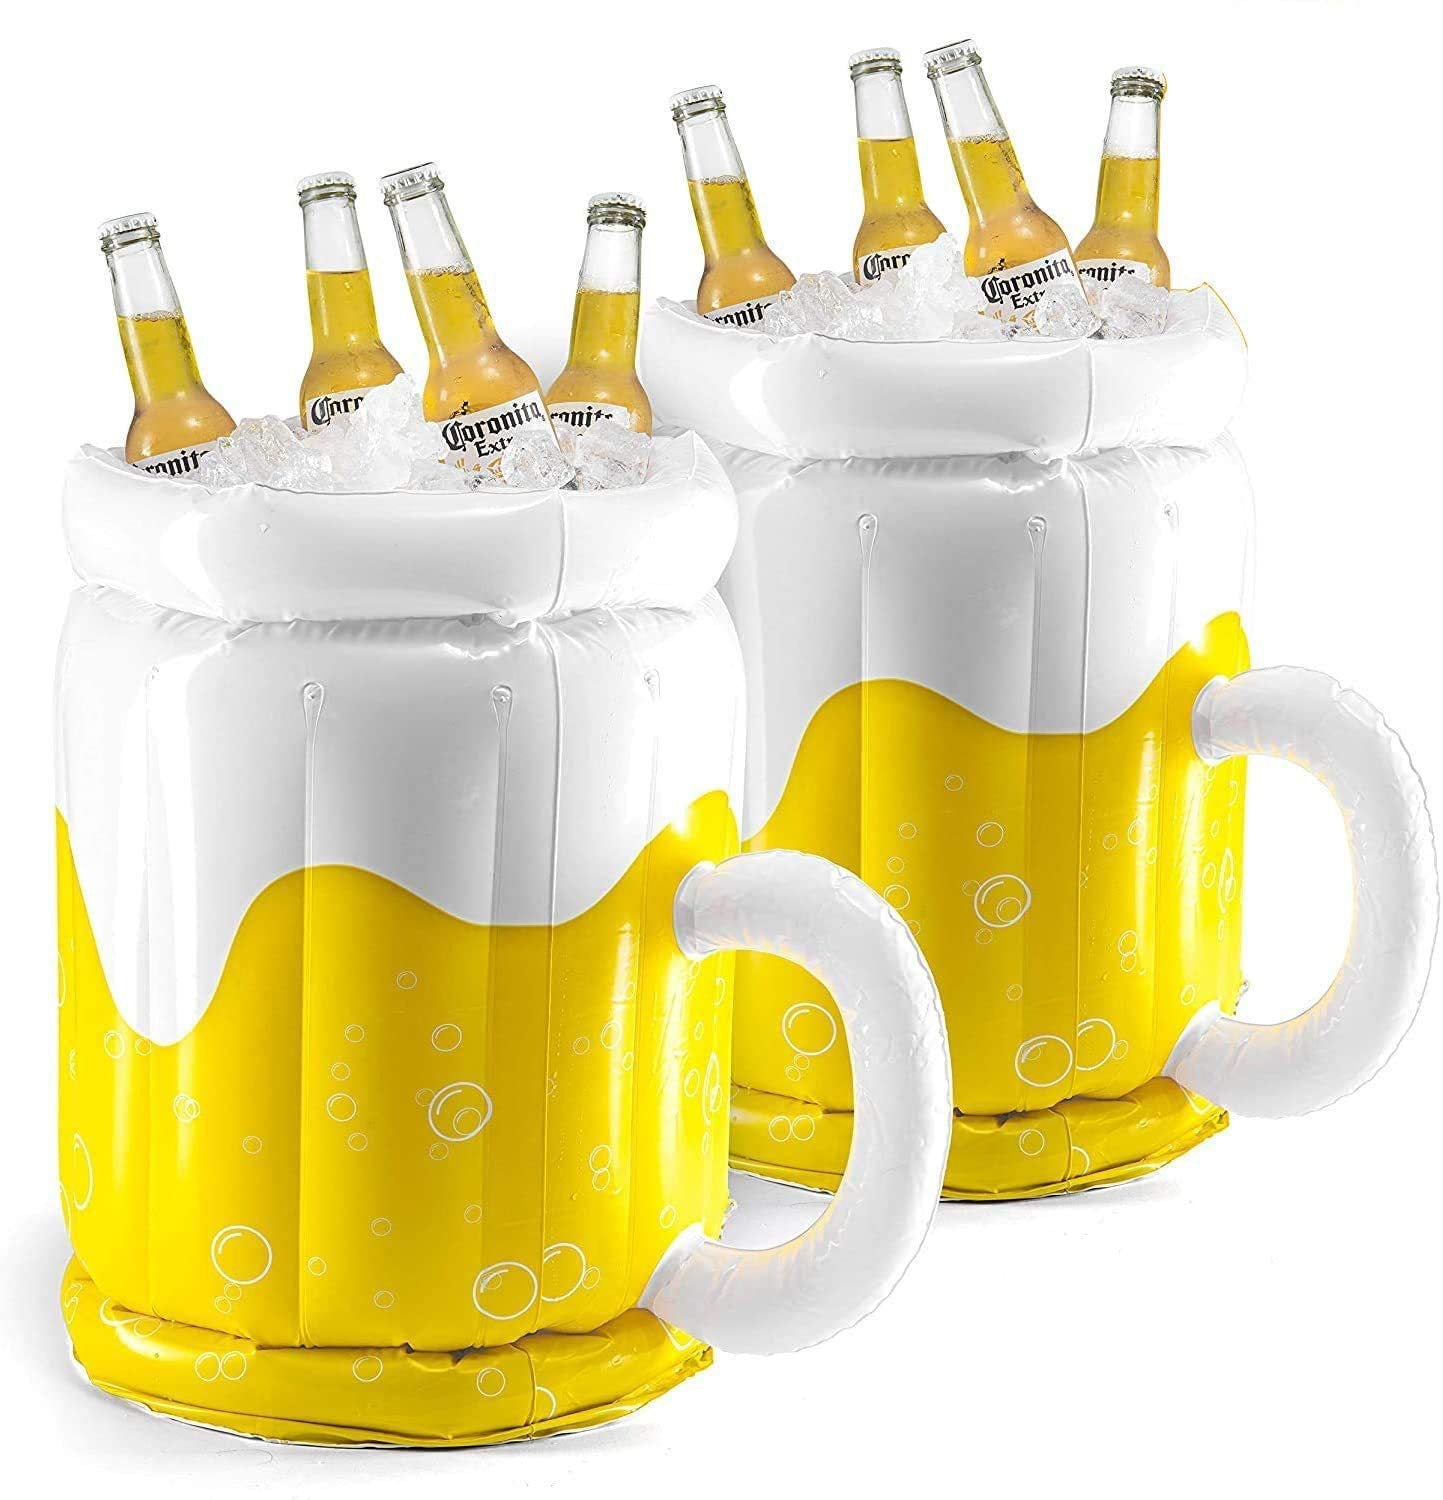 large-inflatable-beer-mug-cooler-pool-float-drink-cooler-for-adults-parties-2-in1-drink-floatie-and-party-supplies-great-toy-for-beach-pool-and-jacuzzi